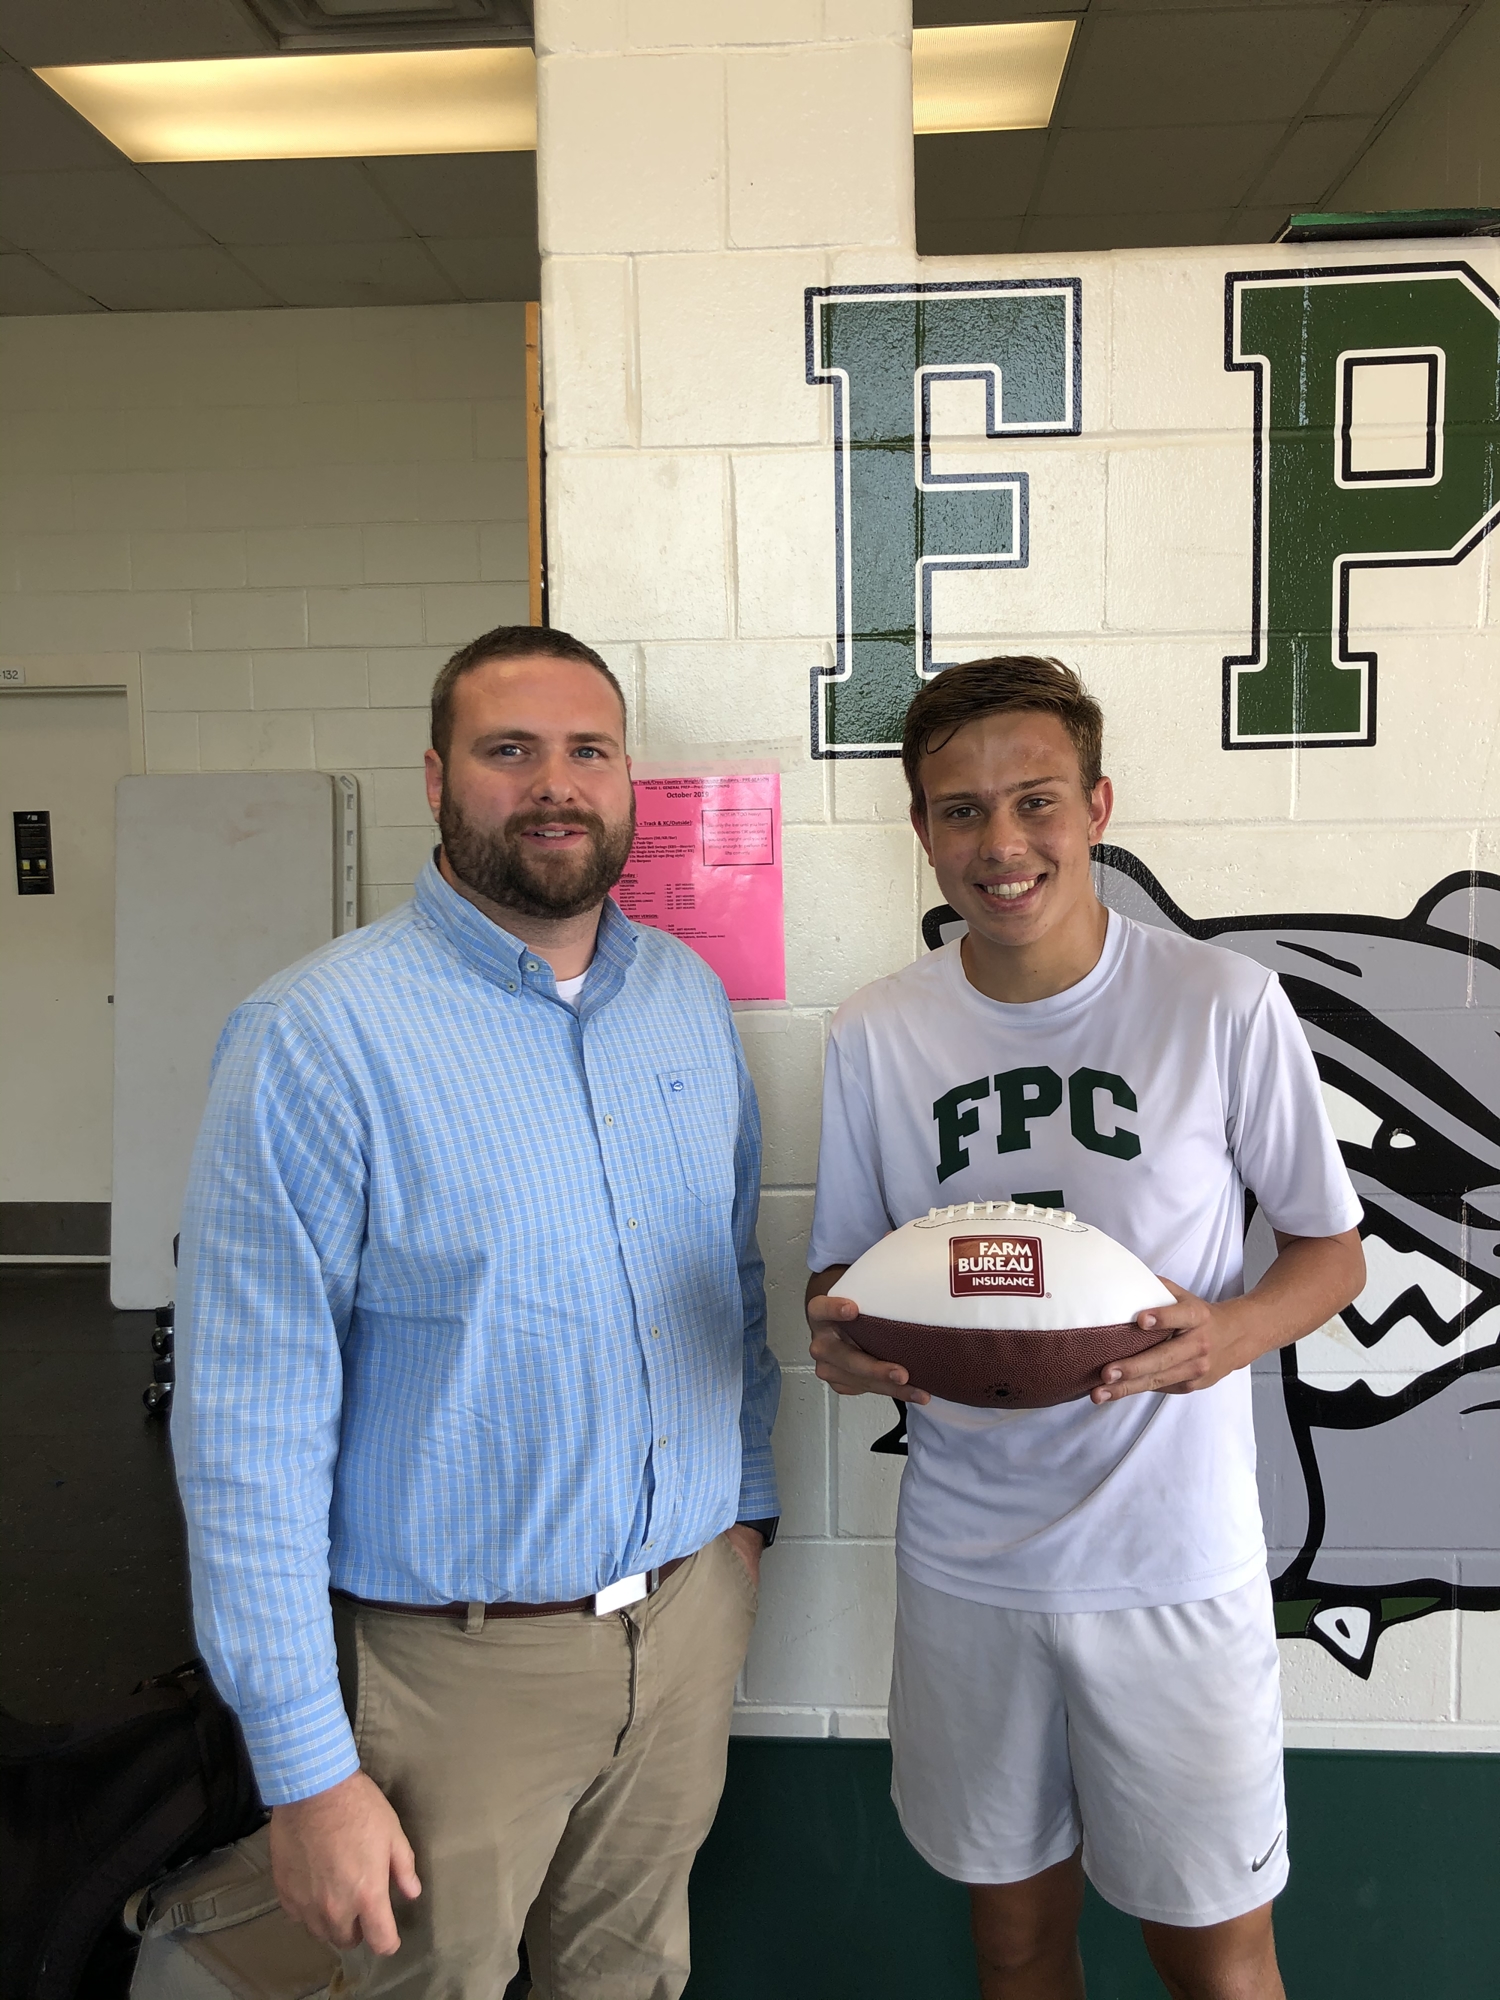 FPC kicker Bryan Burris was named the Farm Bureau Player of the Week after nailing a 35-yard extra point against St. Augustine. Courtesy photo